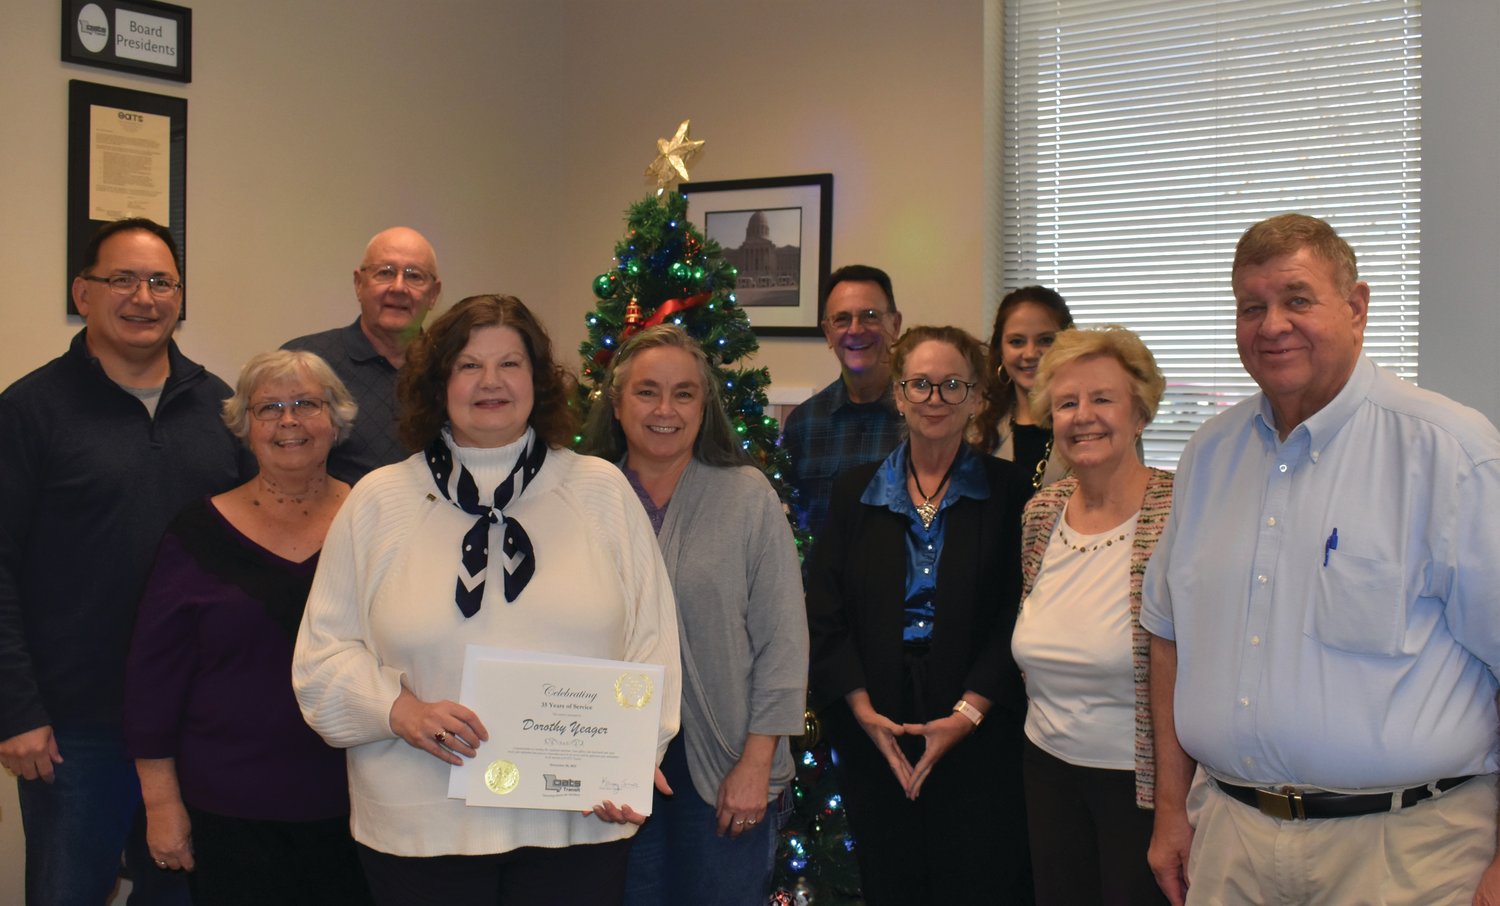 The OATS Transit Board poses with Dorothy Yeager. From left are Andrew Warlen, Jeff Leeman, Patricia Mefford, Dorothy Yeager, Krissy Sinor, Mel Sundermeyer, Julie Rogers, Stacey Steffens, Darleen Rapp and John Griesheimer.